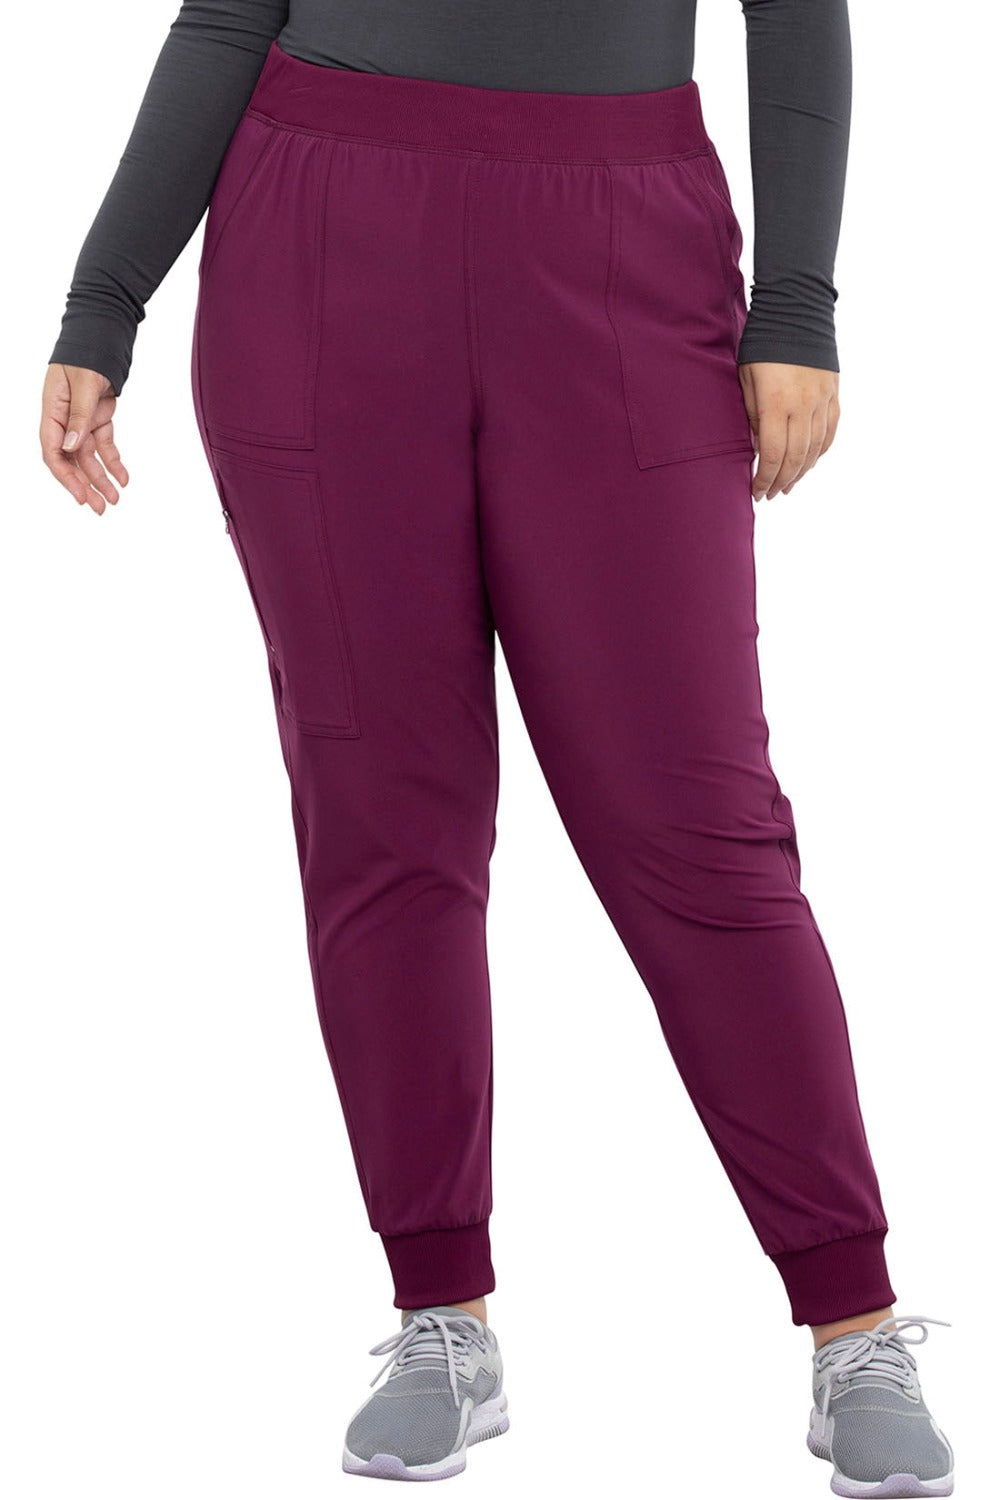 Cherokee Allura Petite Scrub Pant Pull On Jogger in Wine at Parker's Clothing and Shoes.